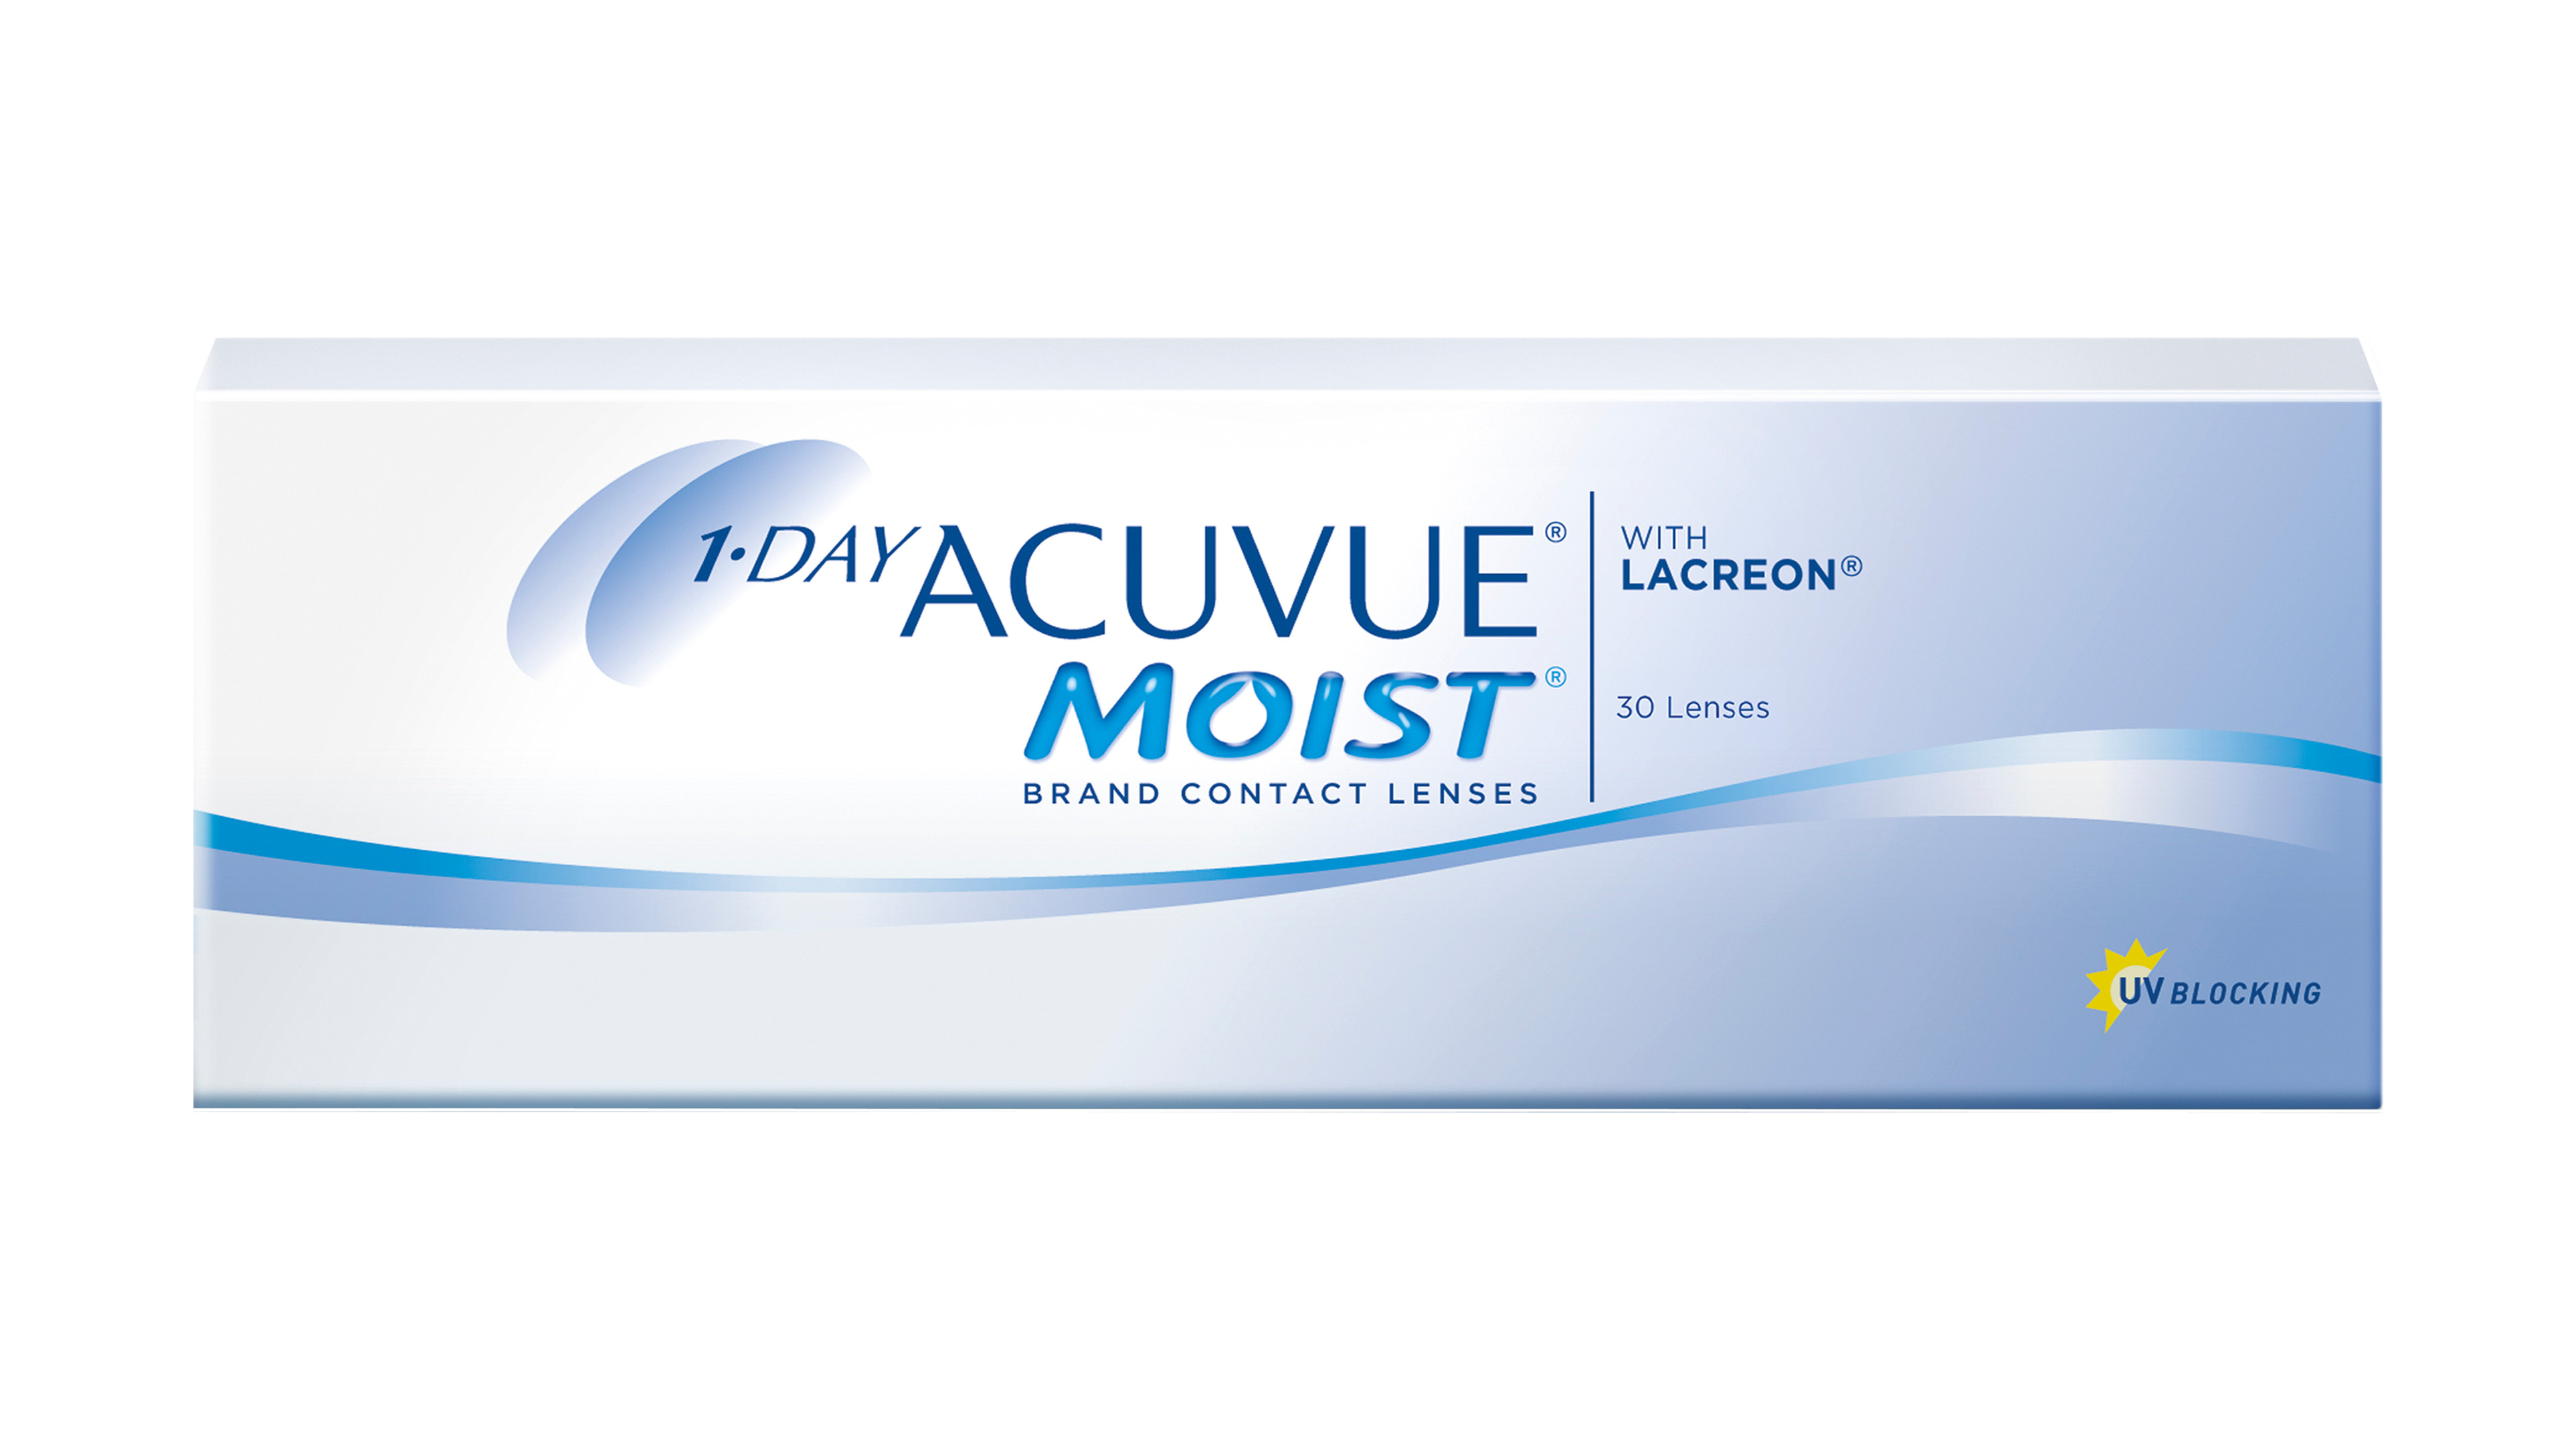 Front ACUVUE® 1-DAY ACUVUE® MOIST Tageslinsen Tageslinsen 30 Linsen pro Packung, pro Auge